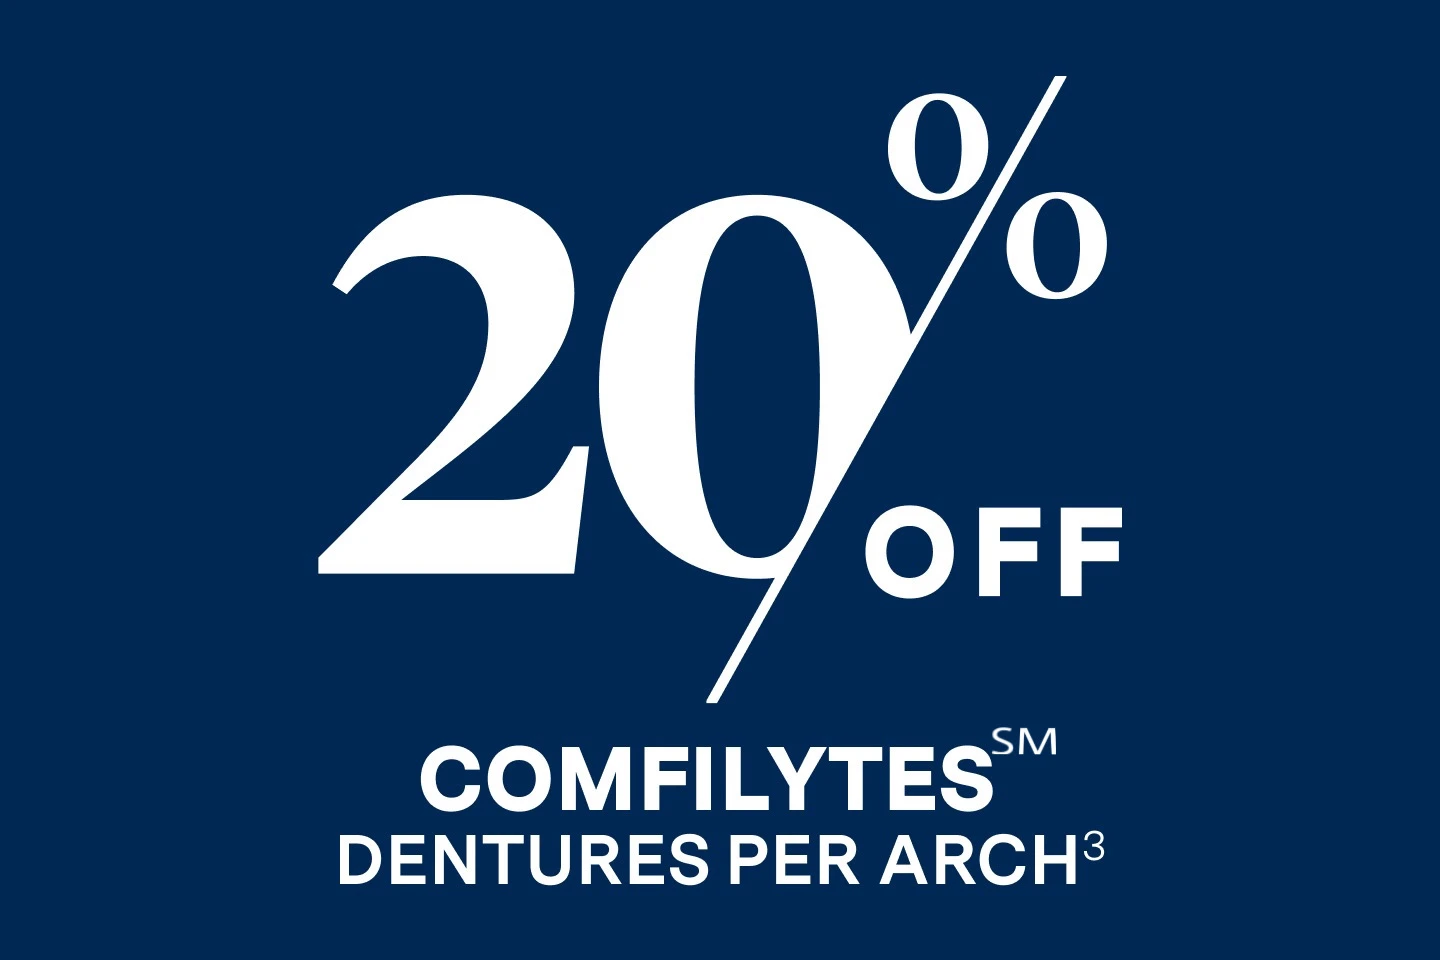 Transform your smile at a price you can afford. For a limited time, get 20% off dentures so you can get back to enjoying life your way.